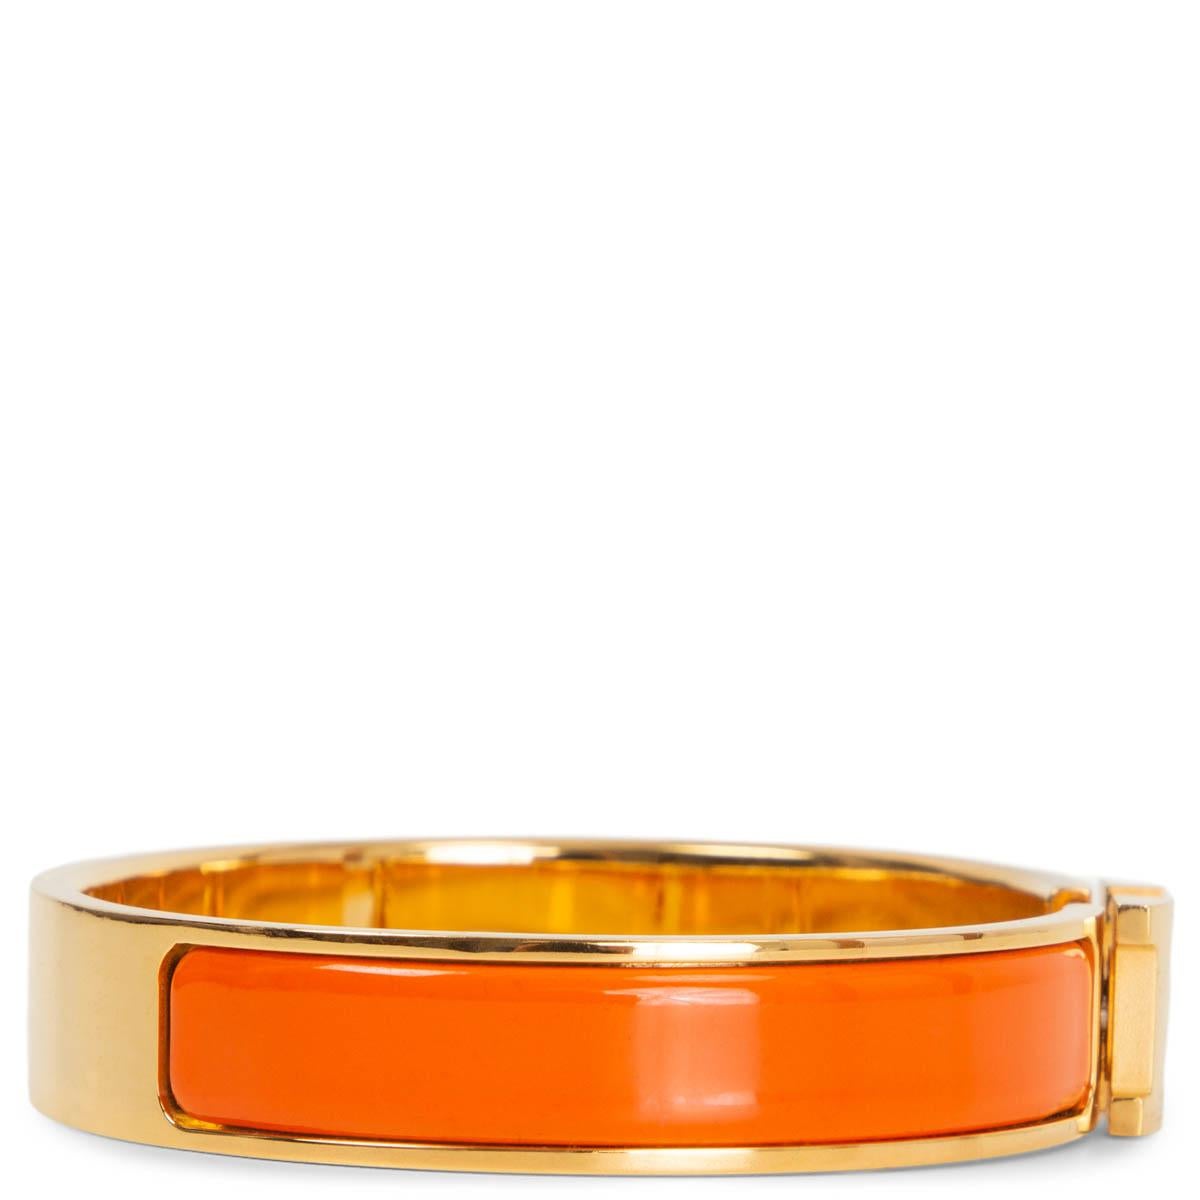 100% authentic Hermès Clic H PM bracelet in orange enamel and with yellow gold plated hardware. Has been worn with very faint scratches to the hardware. Overall in excellent condition. Comes with pouch. 

Measurements
Width	1.2cm